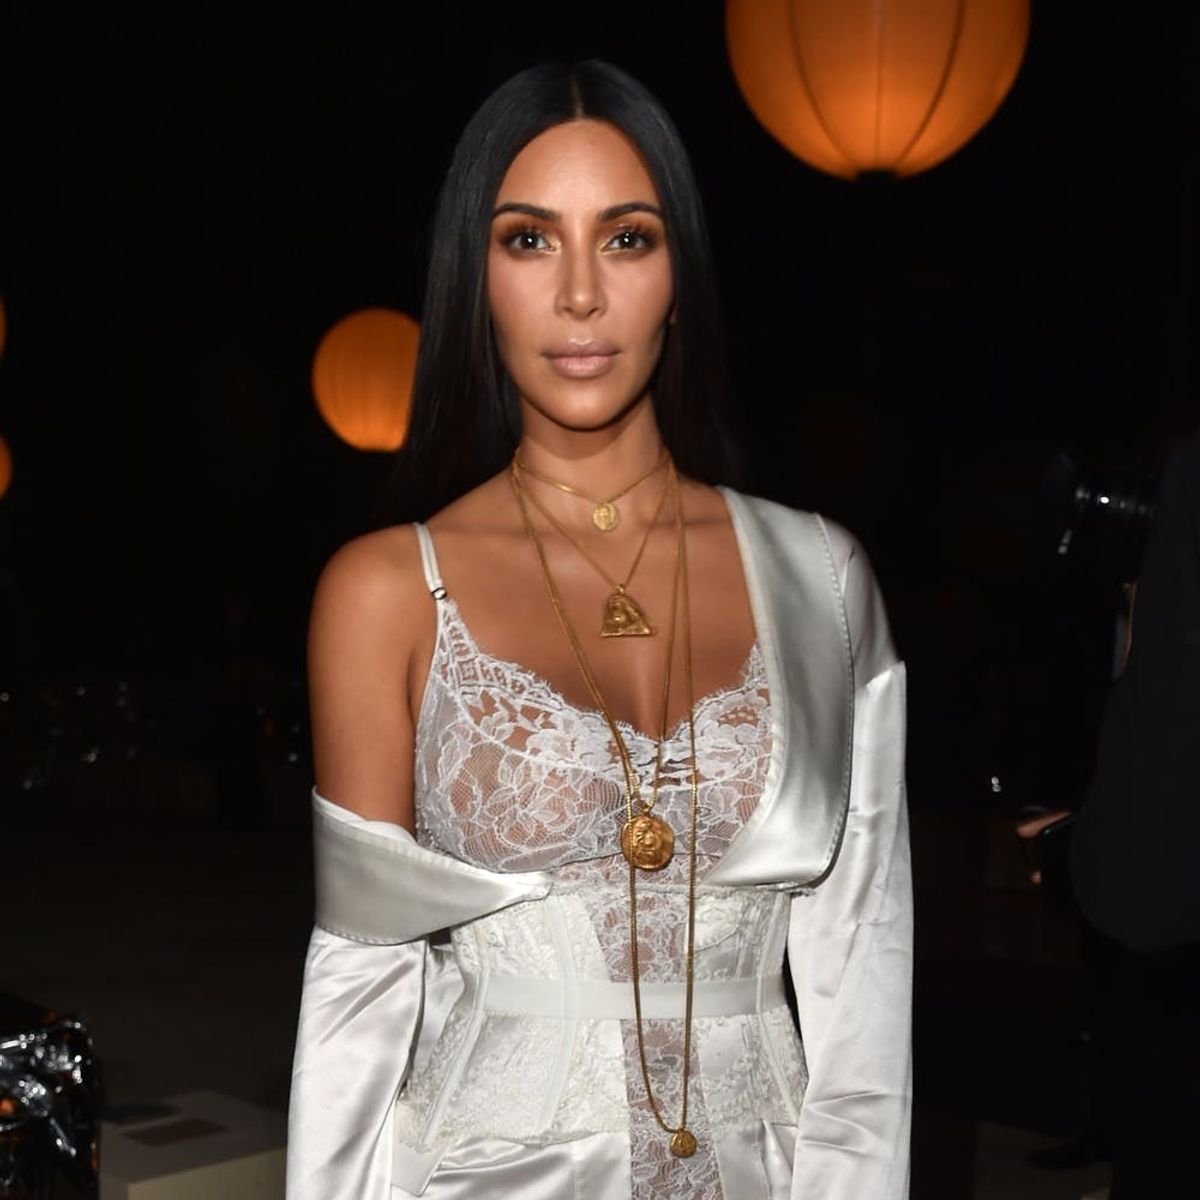 Kim Kardashian Is Battling This Brutal Condition on Her Face